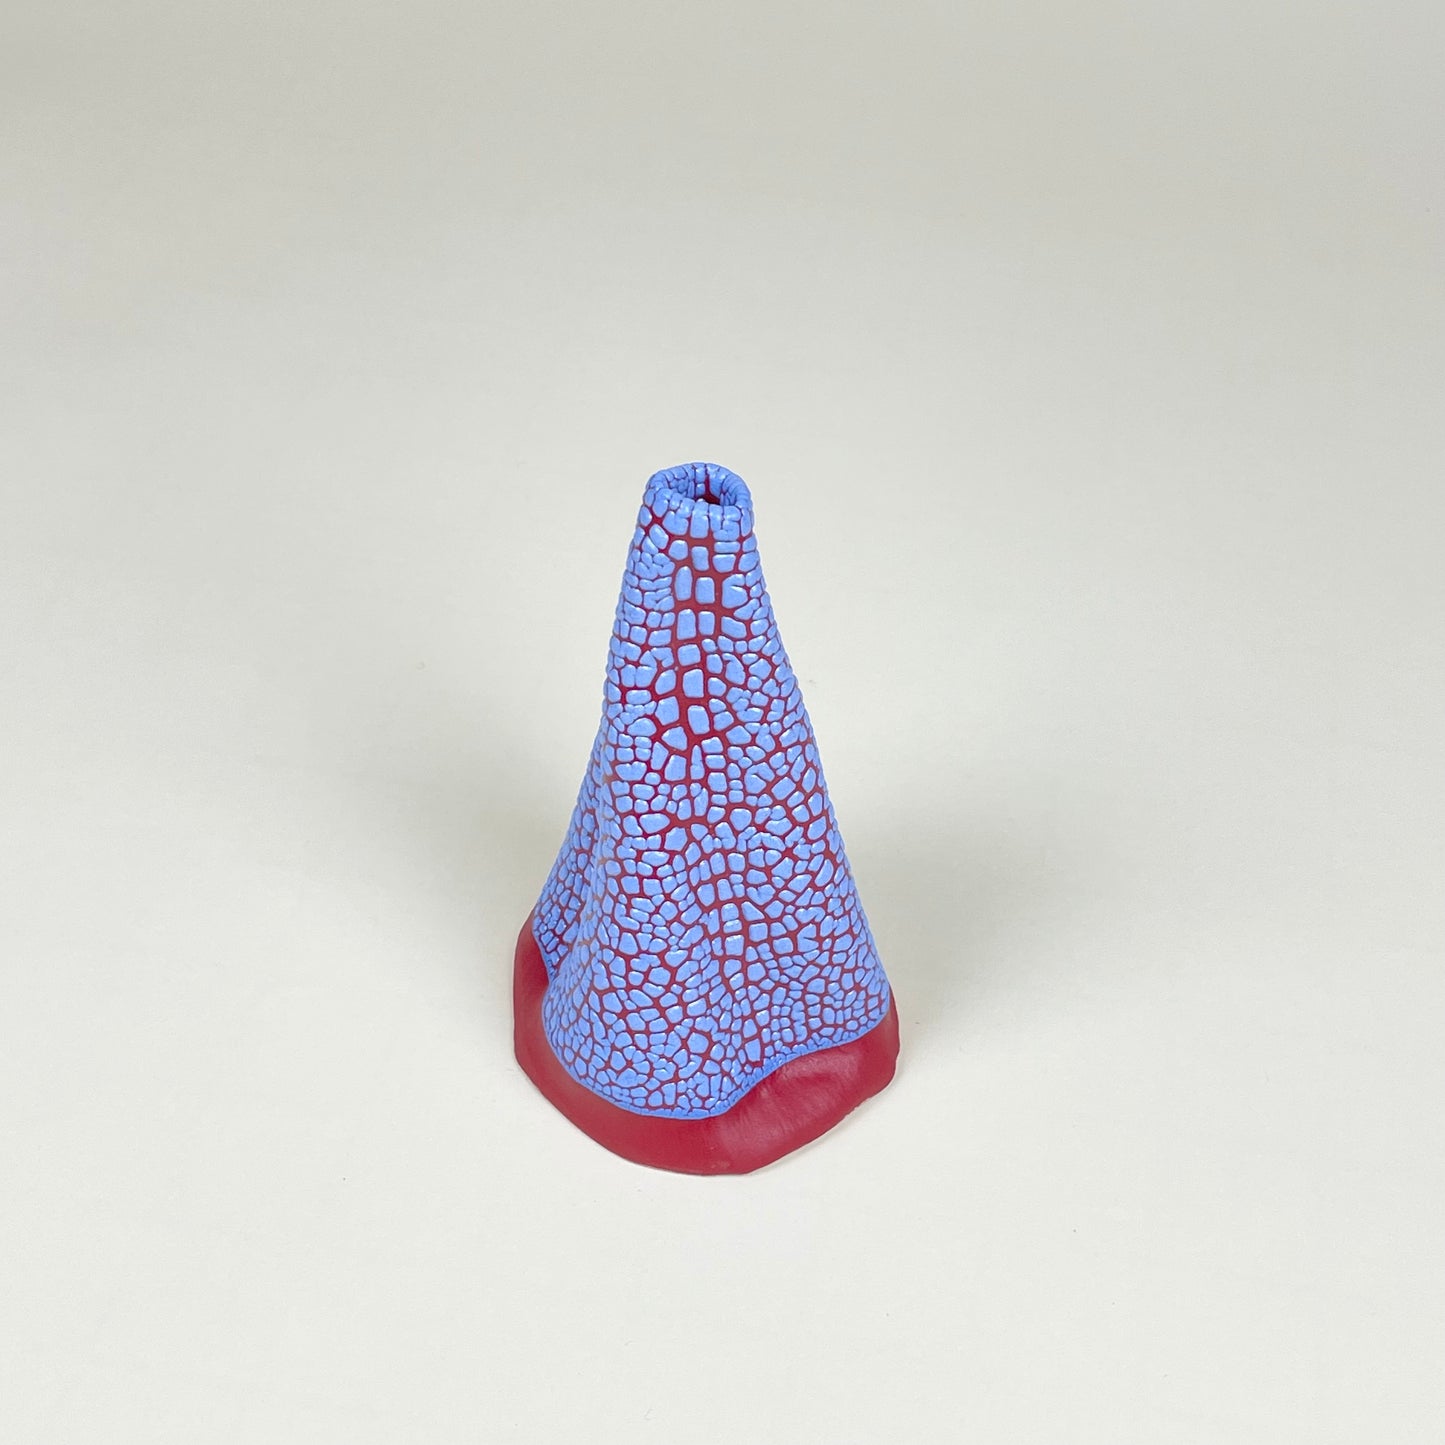 Red and blue volcano vase (L) by Astrid Öhman.